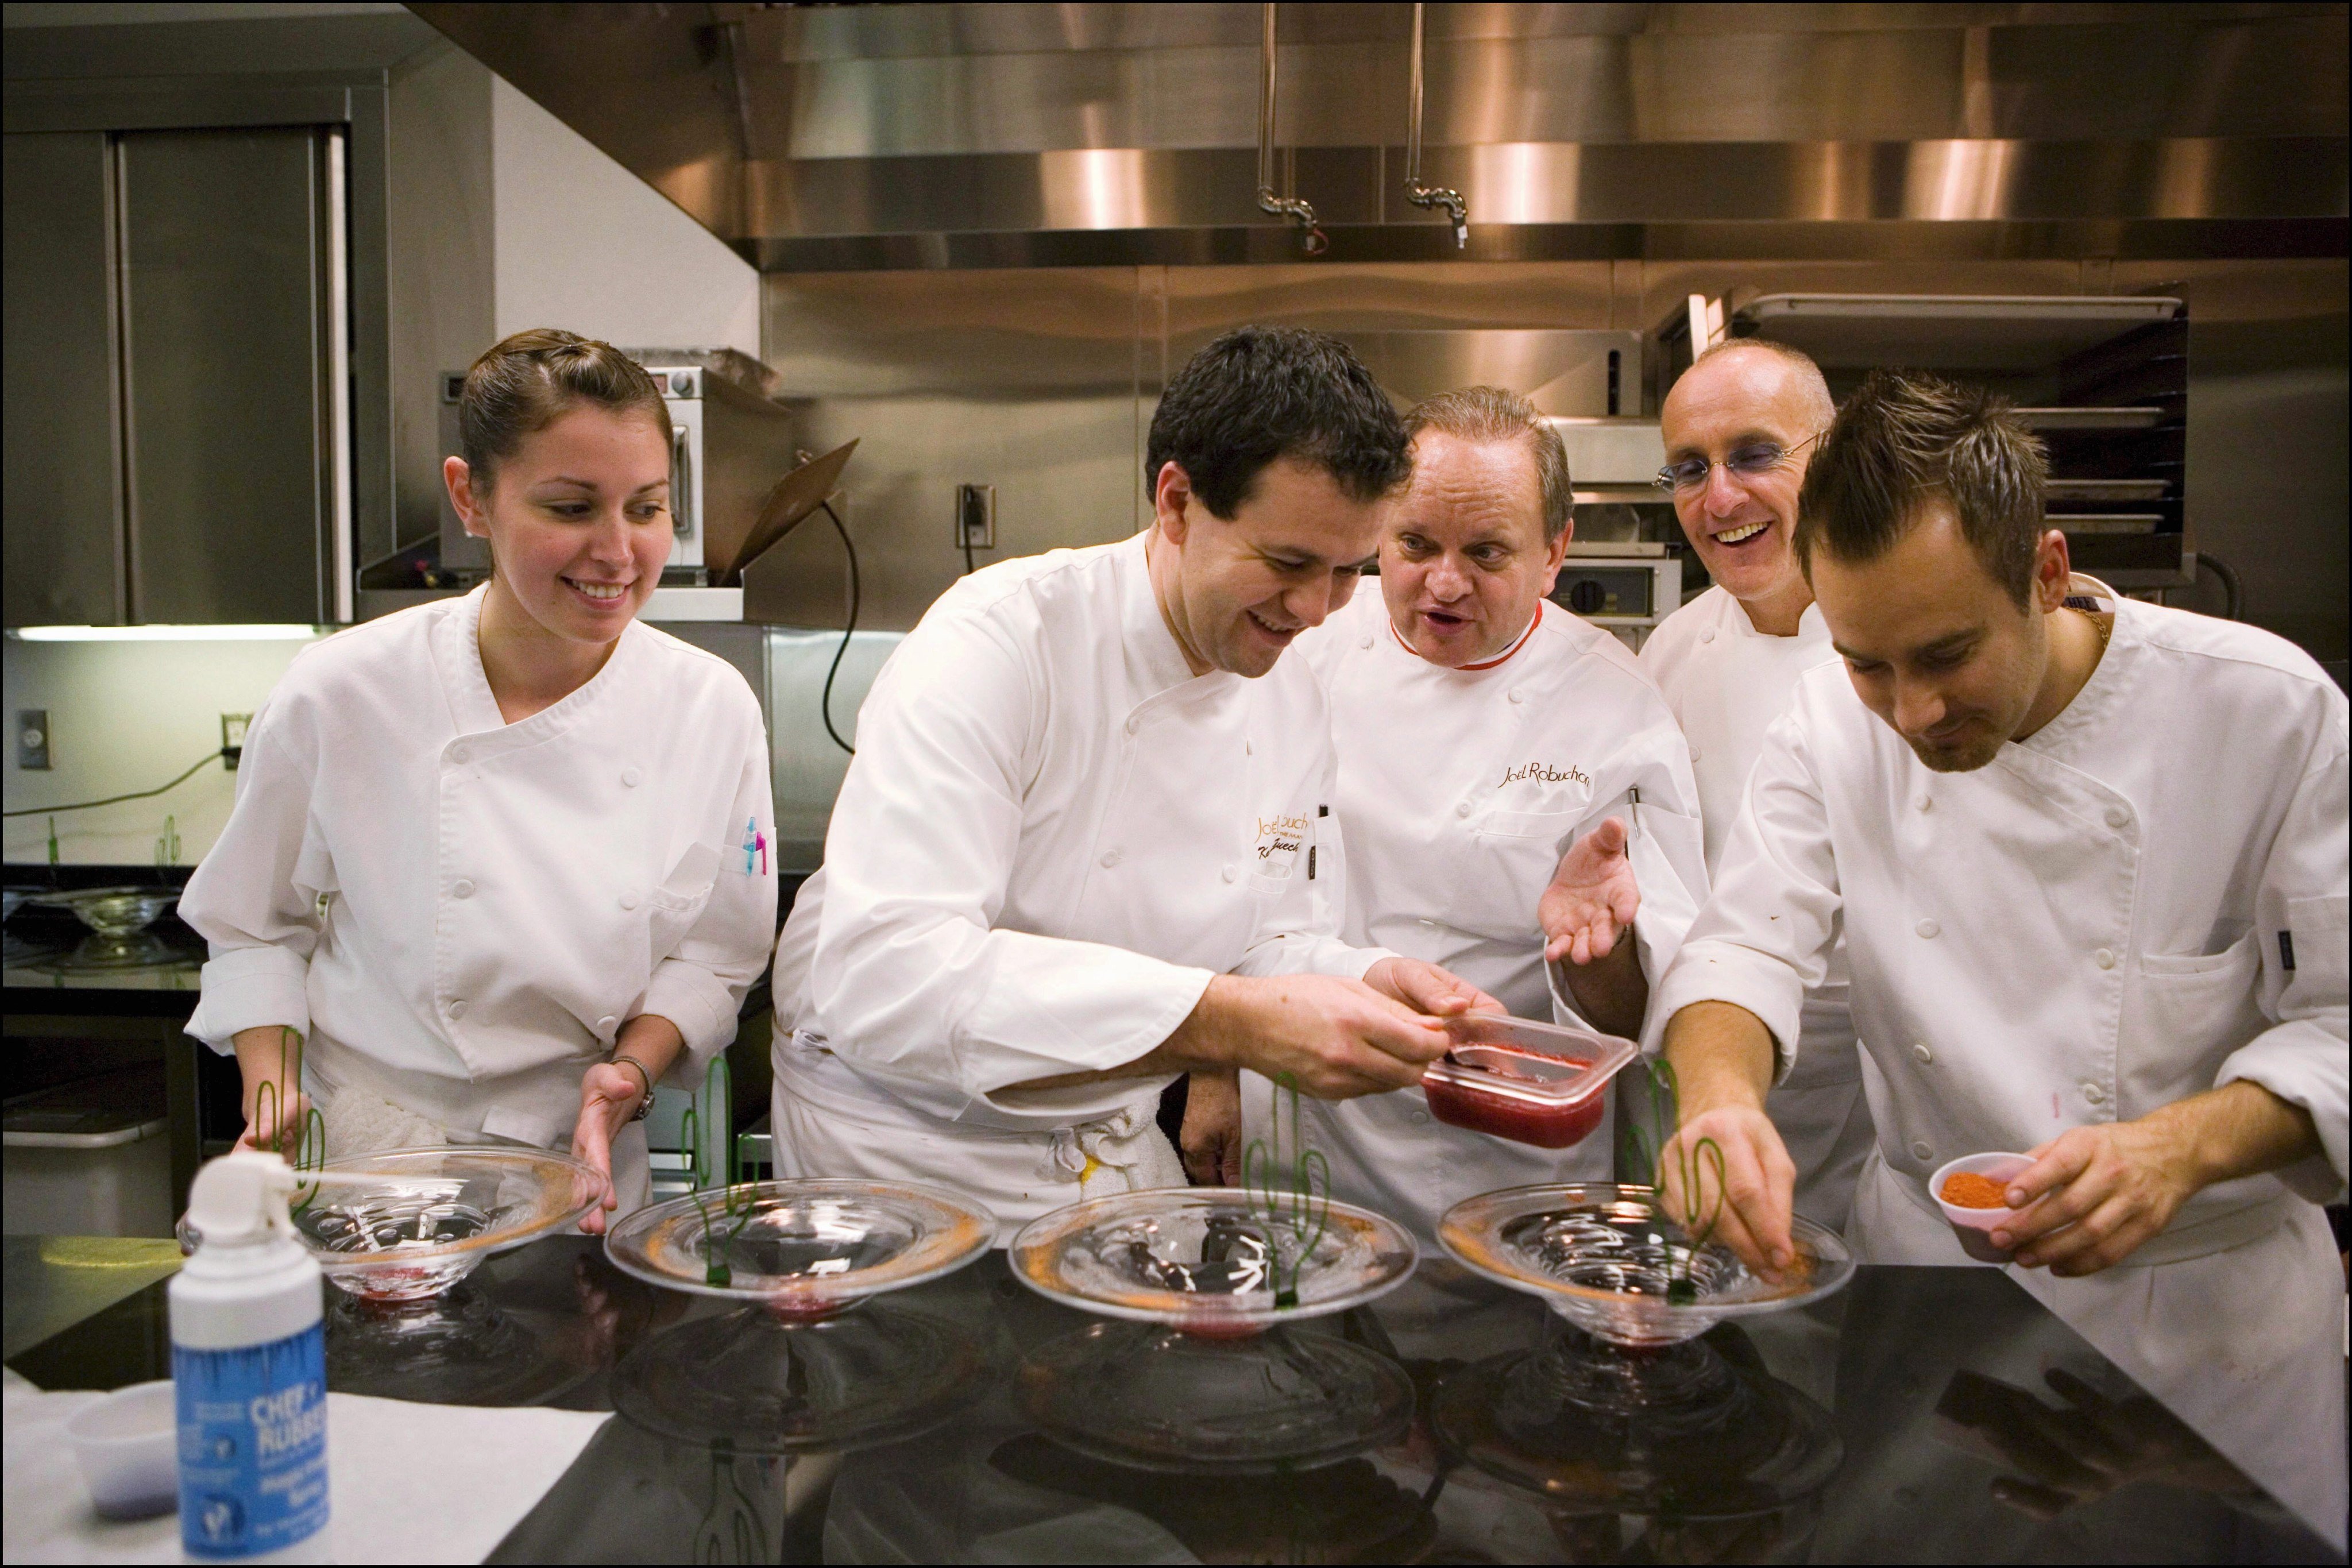 Chef Joel Robuchon (centre) with his team at his restaurant The Mansion, in Las Vegas, in 2005. Our obsession with celebrity chefs overlooks the teams behind them that contribute to restaurants’ Michelin-star status. Photo: Getty Images